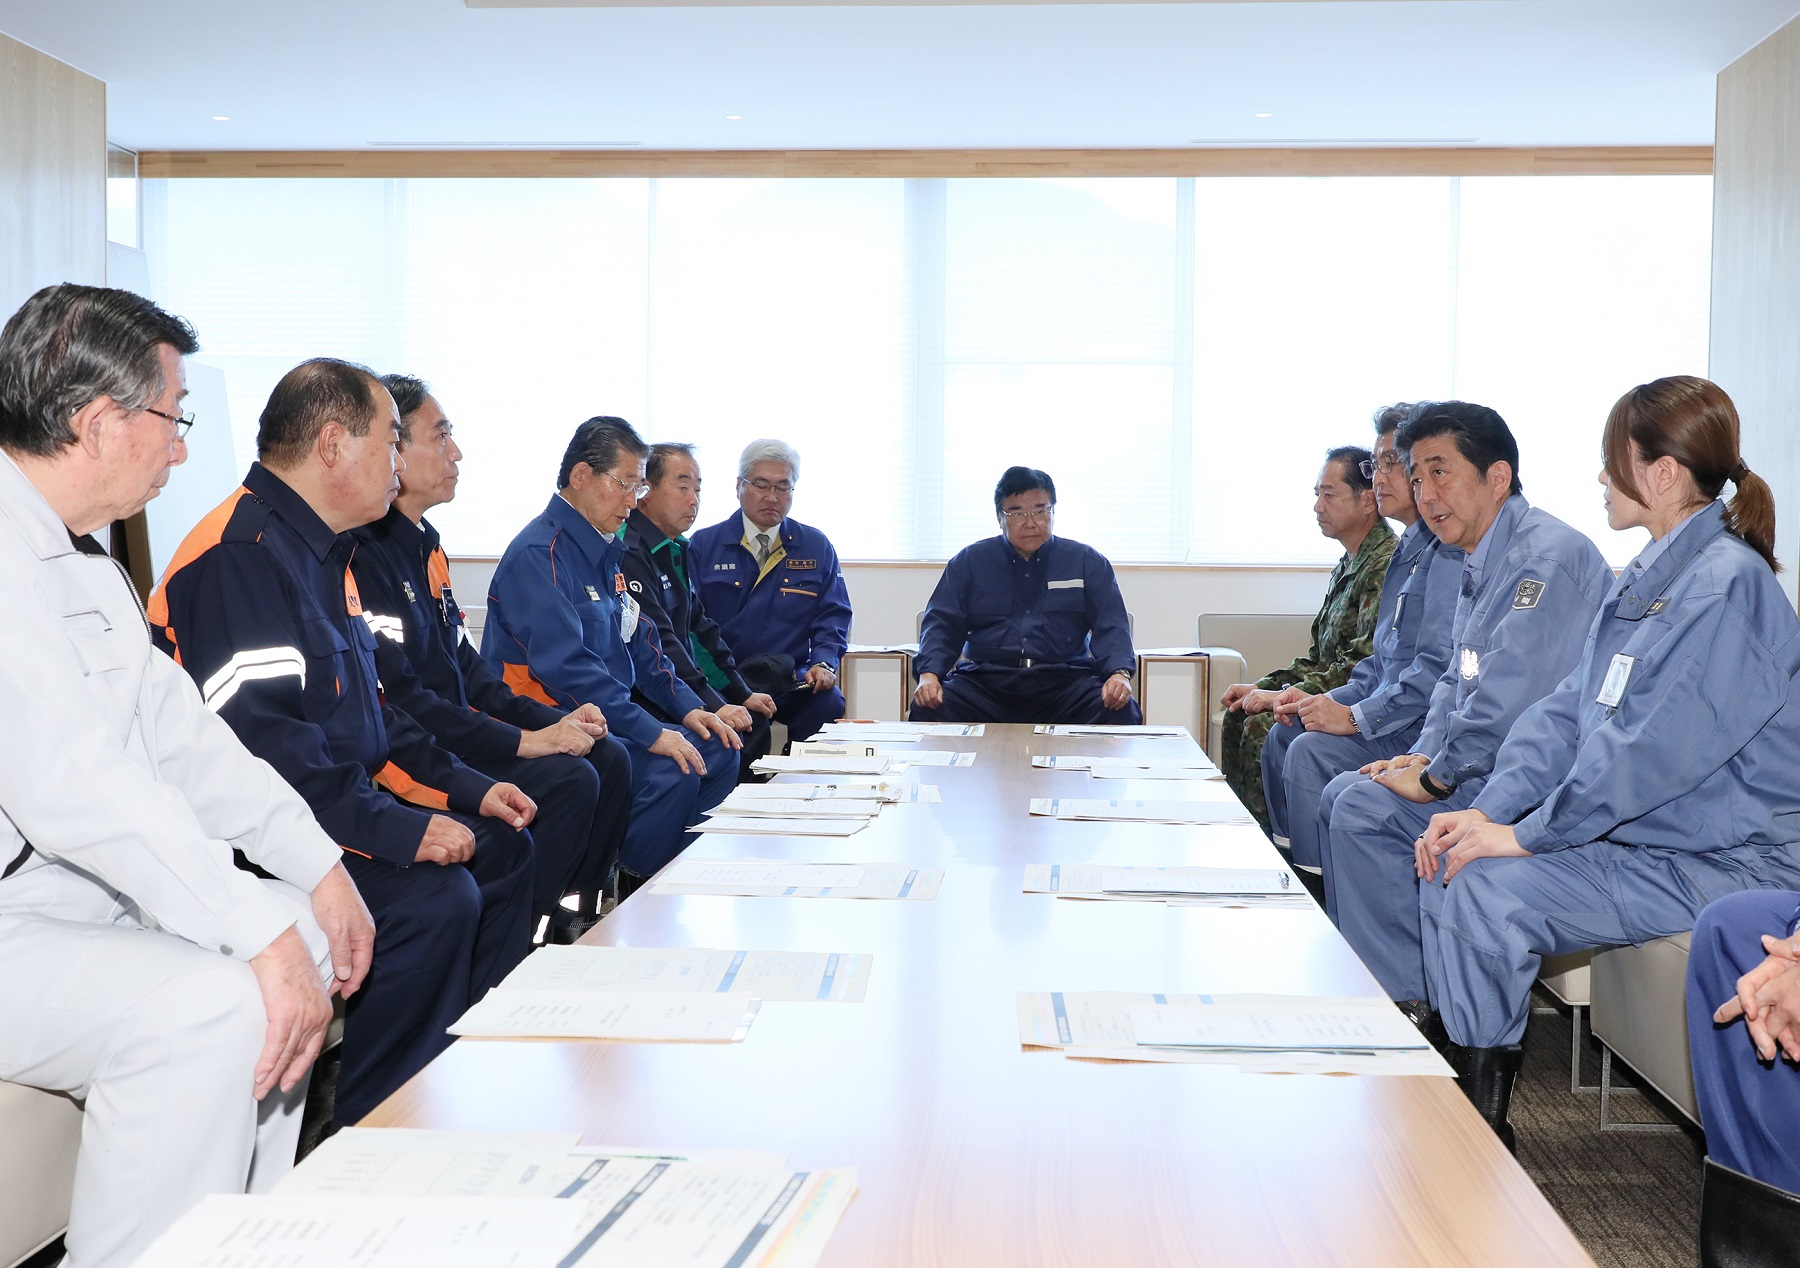 Photograph of an exchange of views with the Governor of Nagano Prefecture